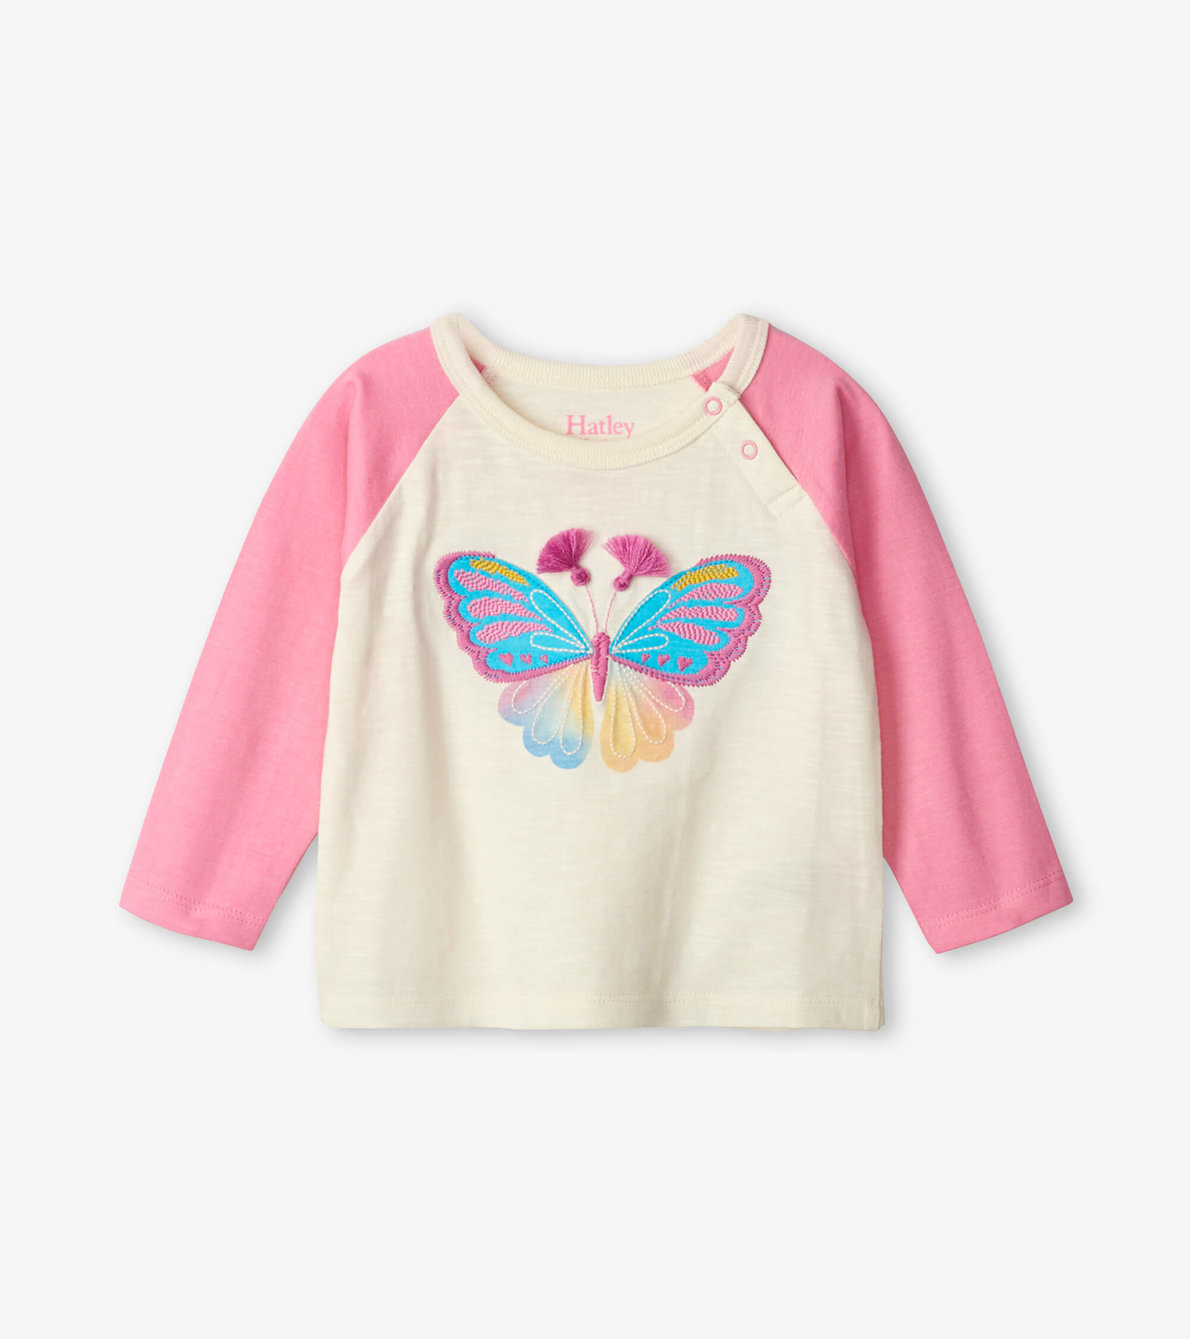 View larger image of Butterfly Raglan Baby Tee